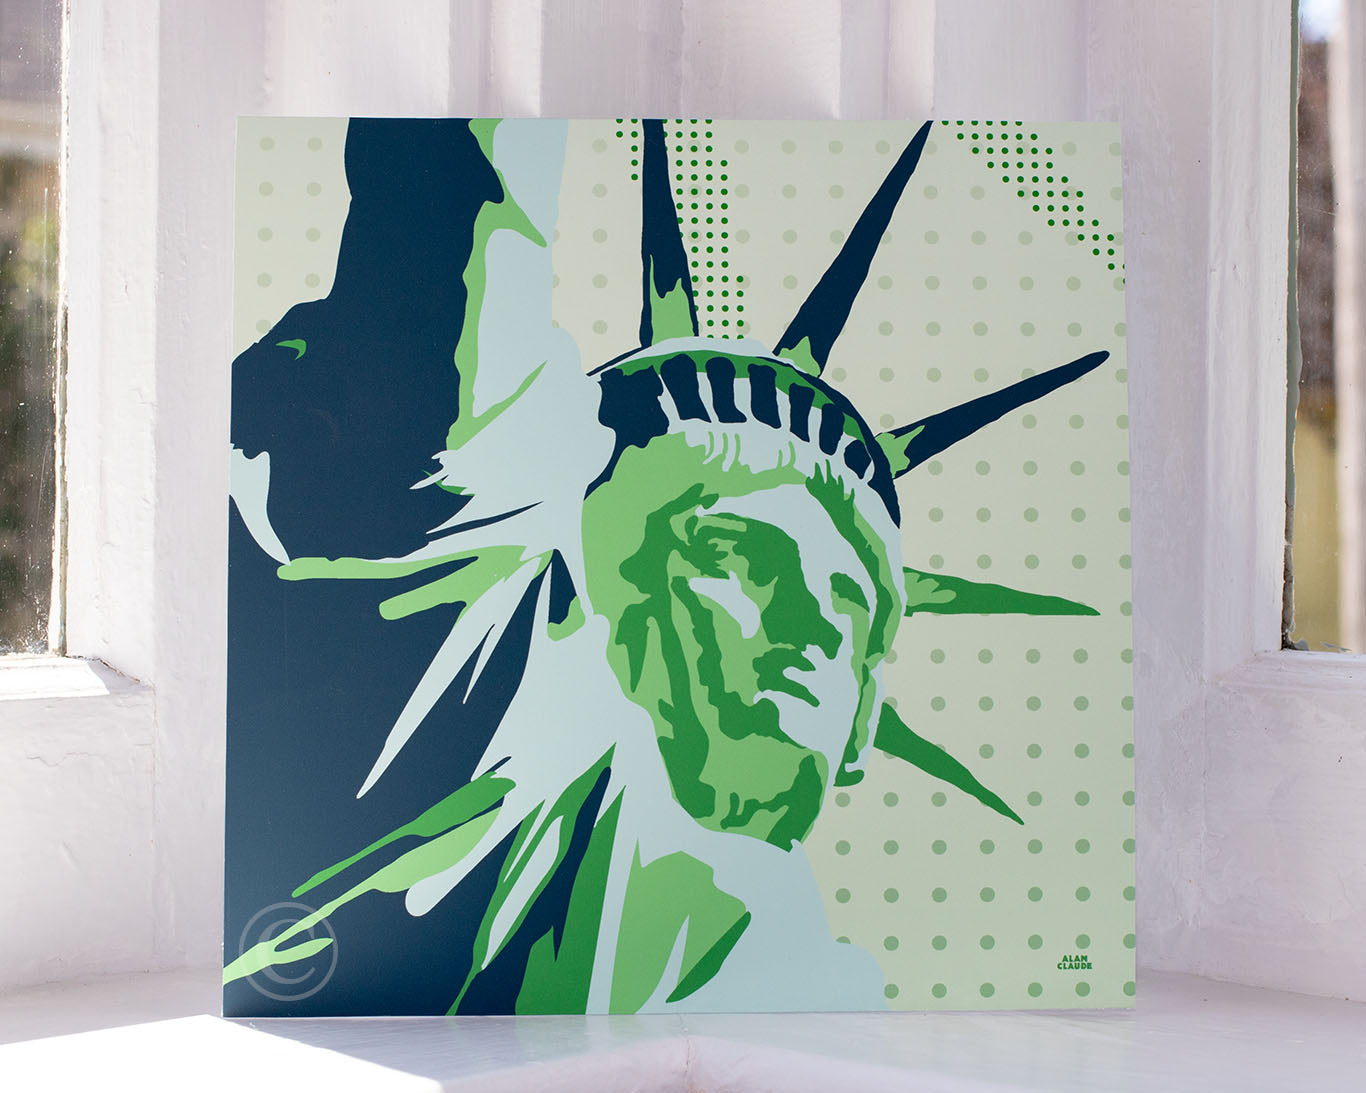 Statue Of Liberty Art Print 8" x 8" Wall Poster Wall Poster By Alan Claude - New York